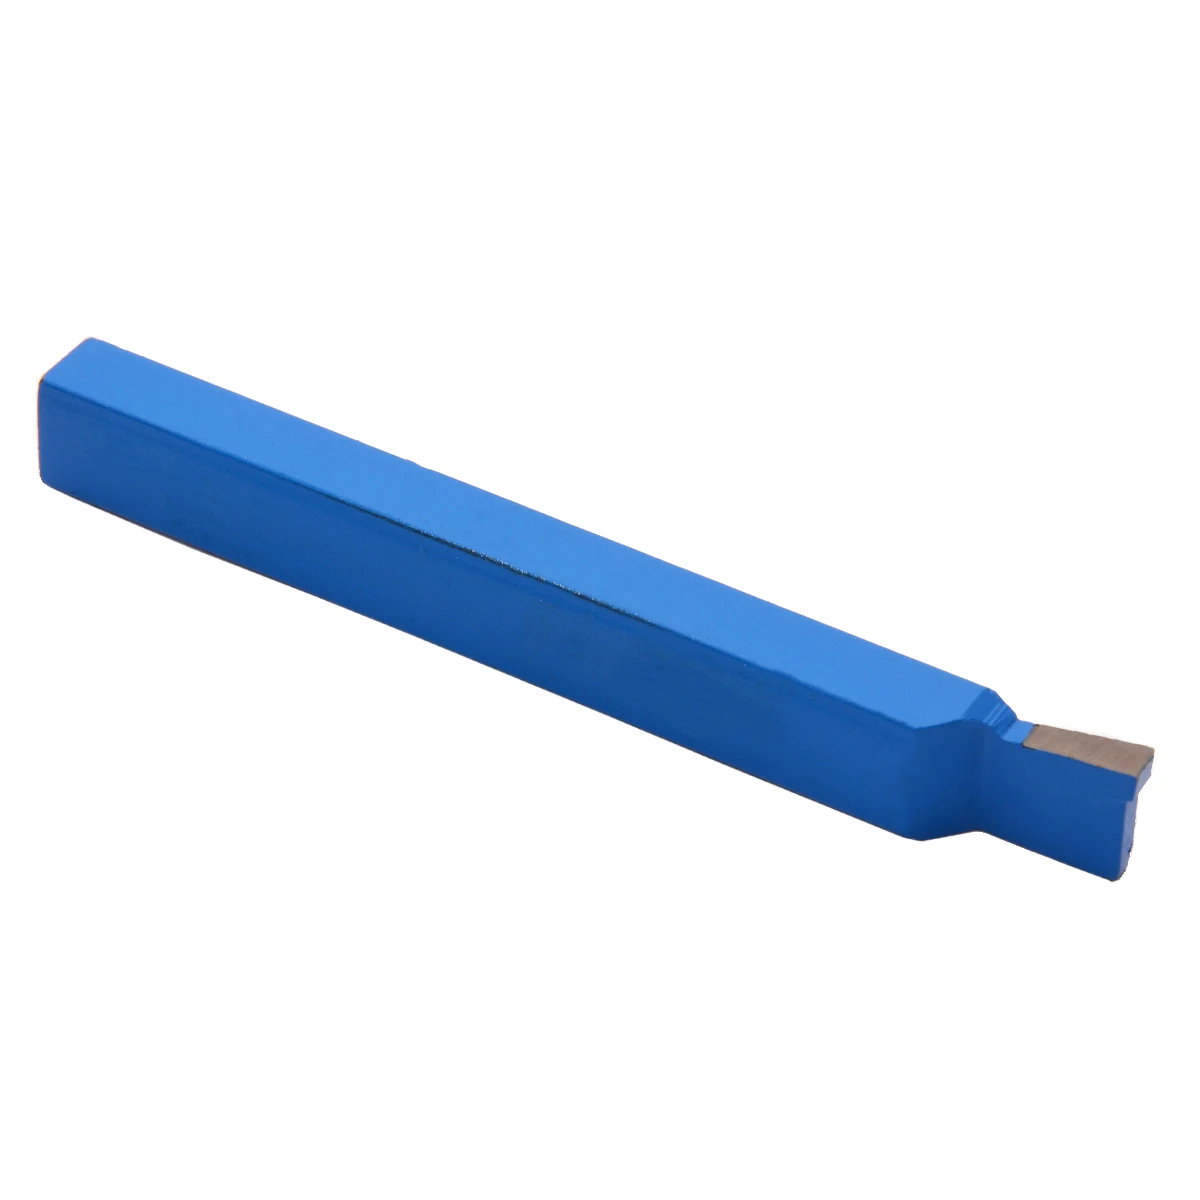 1pc Mayitr Alloy Carbide-Tipped Spiral Lathe Turning Tool Blue with High Hardness For 10mm DIN 4981